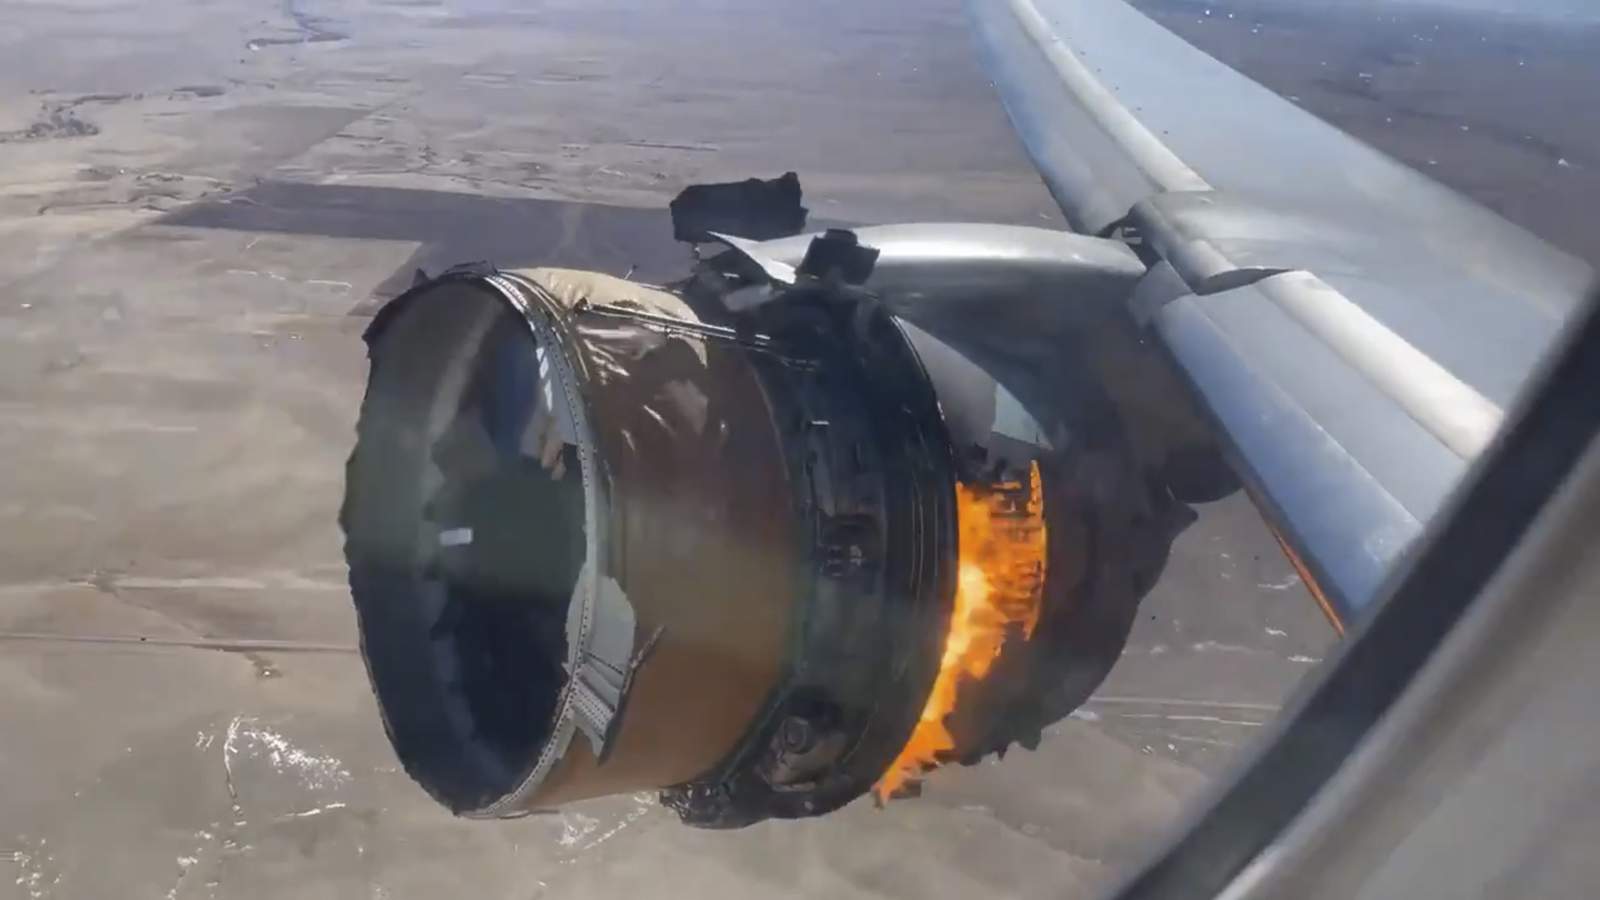 FAA grounds certain planes after engine blows up during United flight